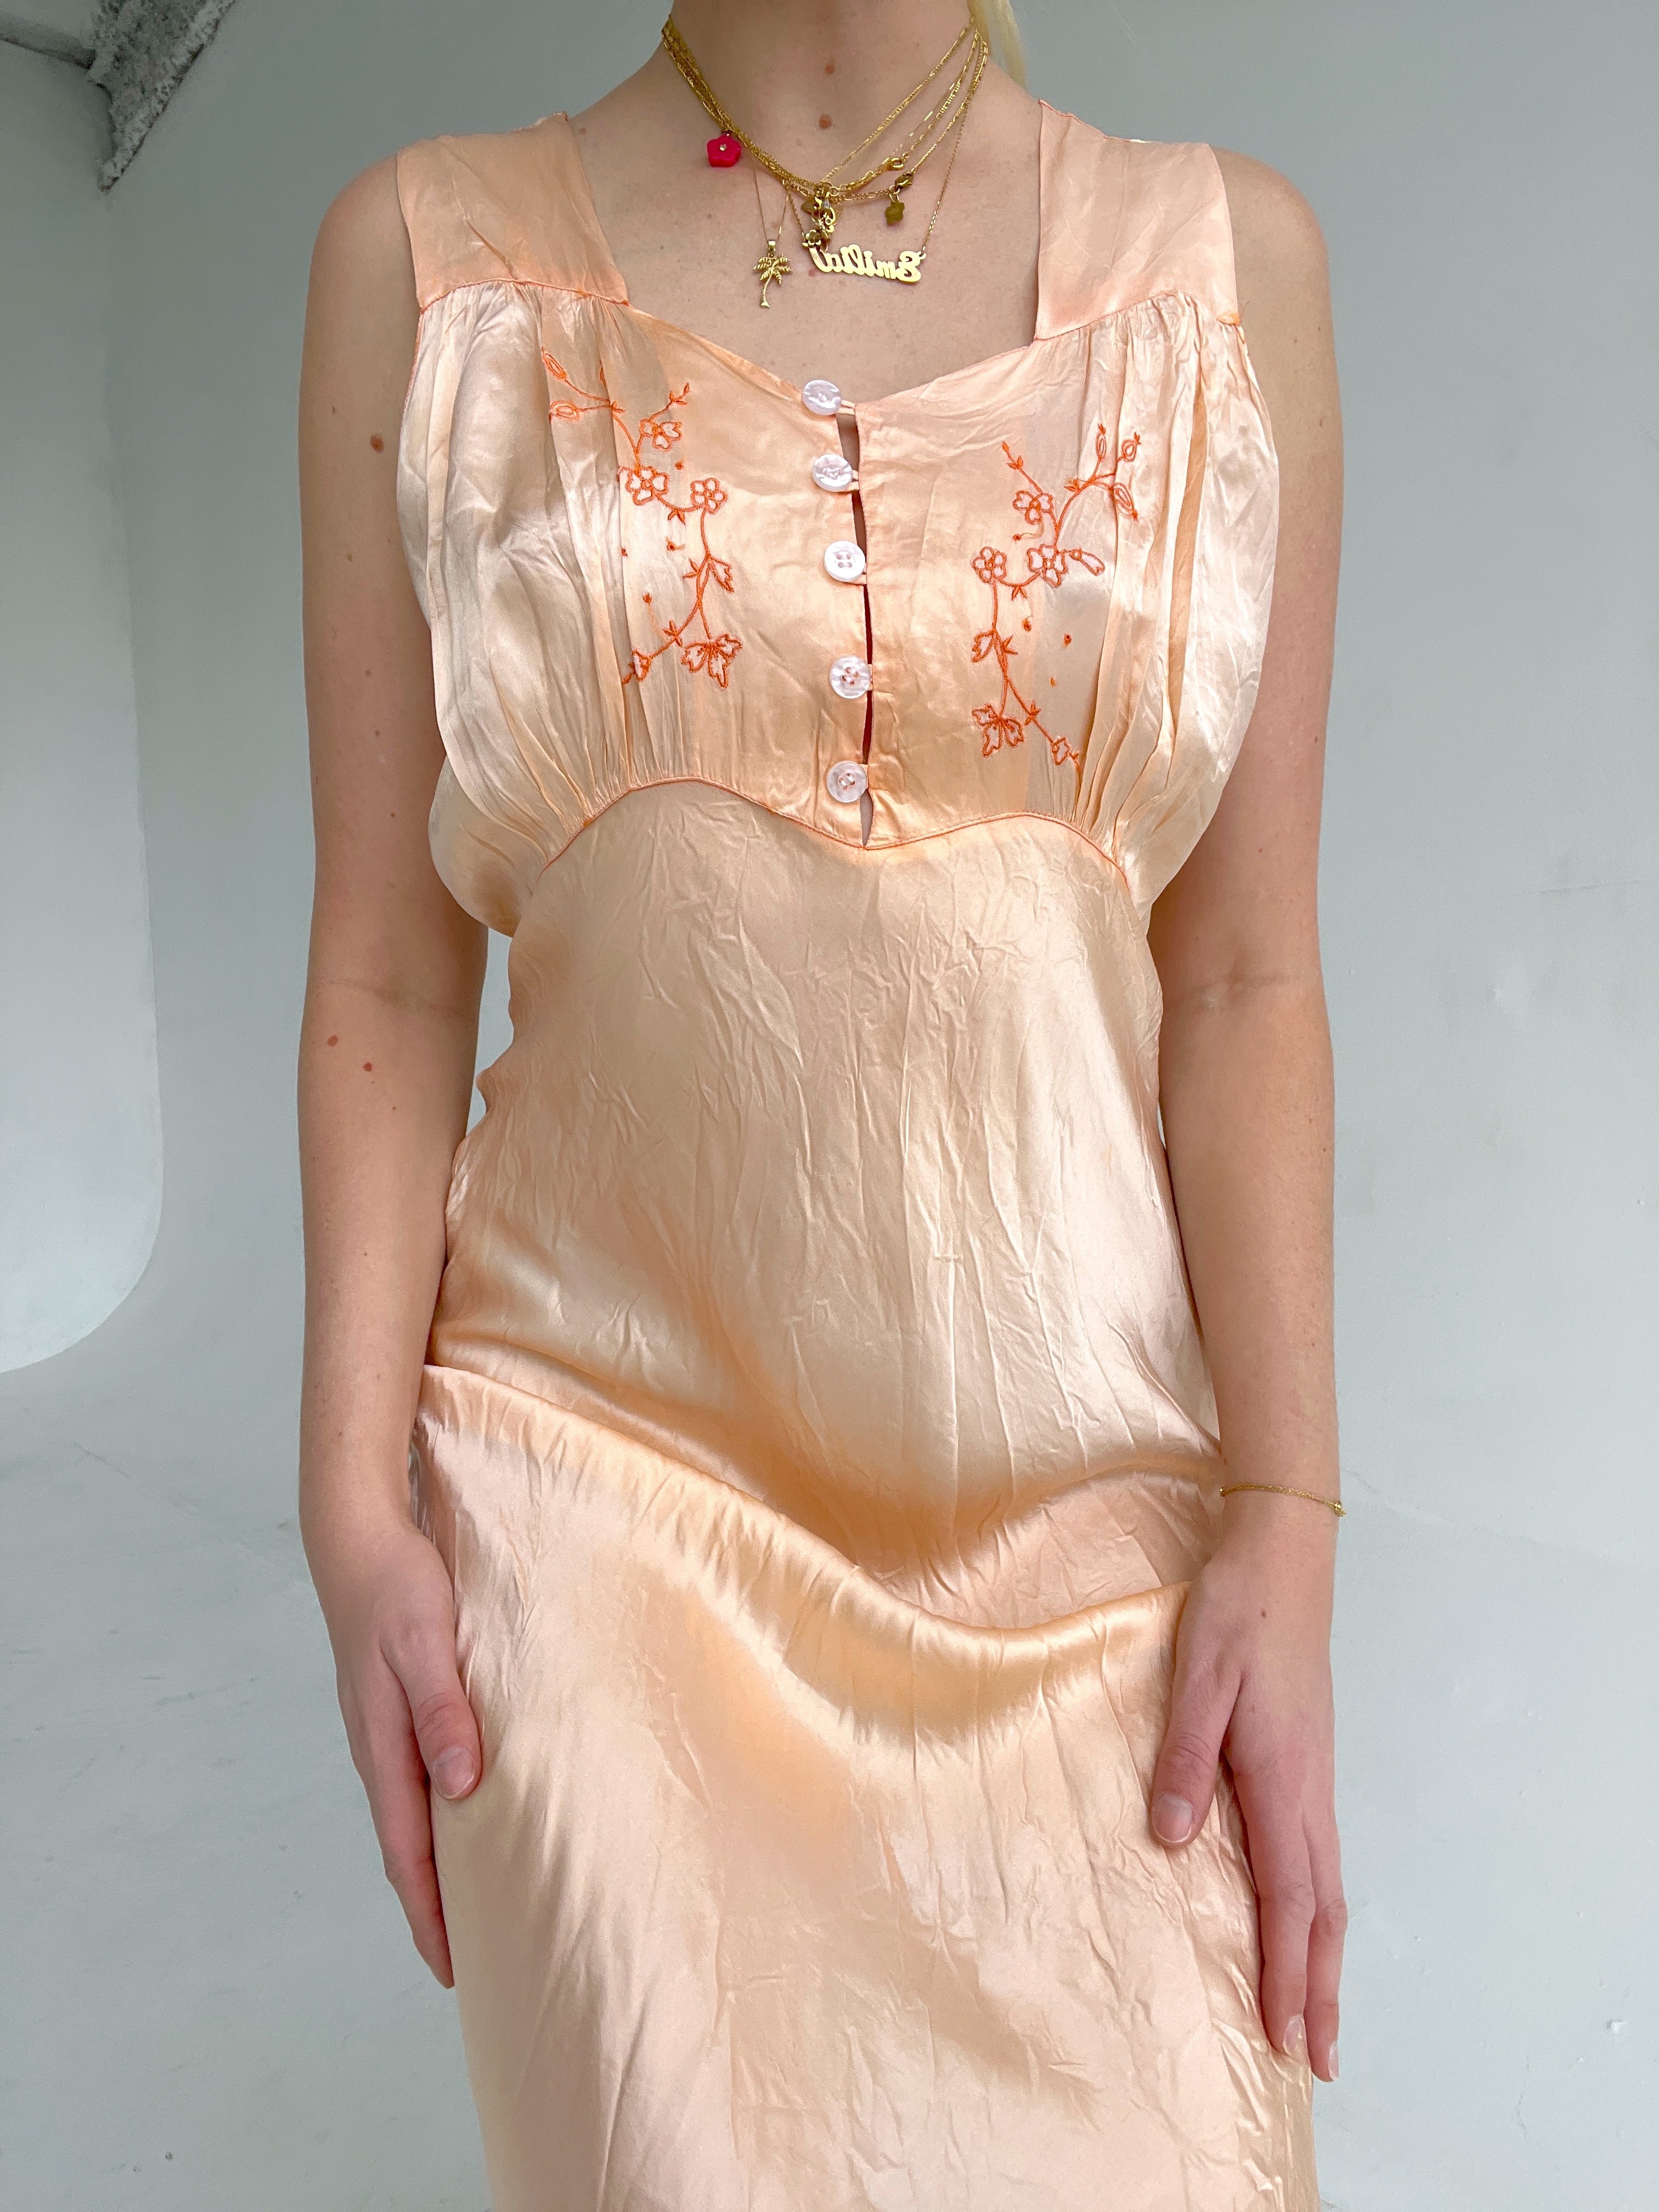 Hand Dyed Orange Satin Slip with Embroidery